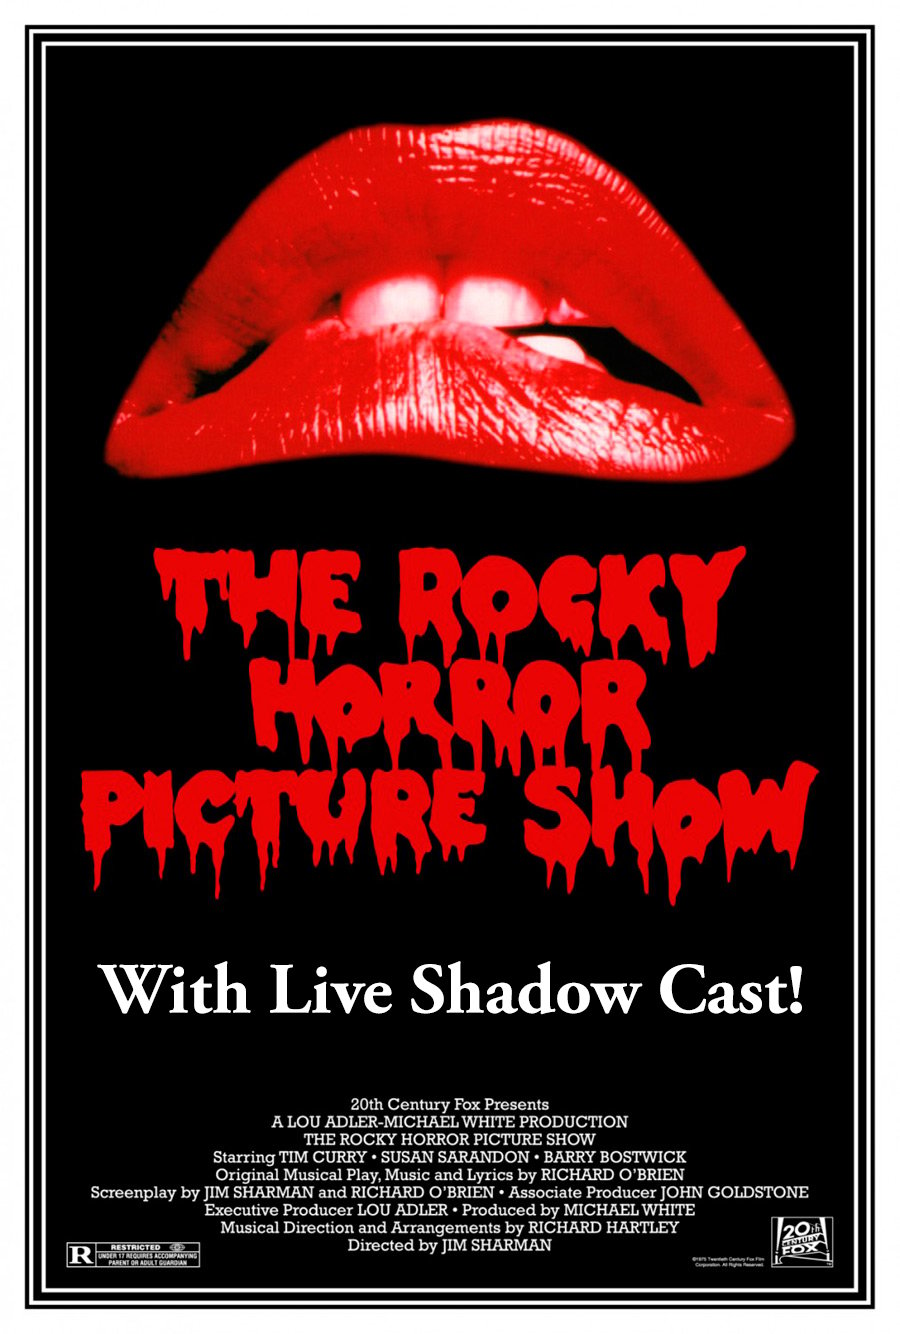 Experience the 'The Rocky Horror Picture Show' like never before